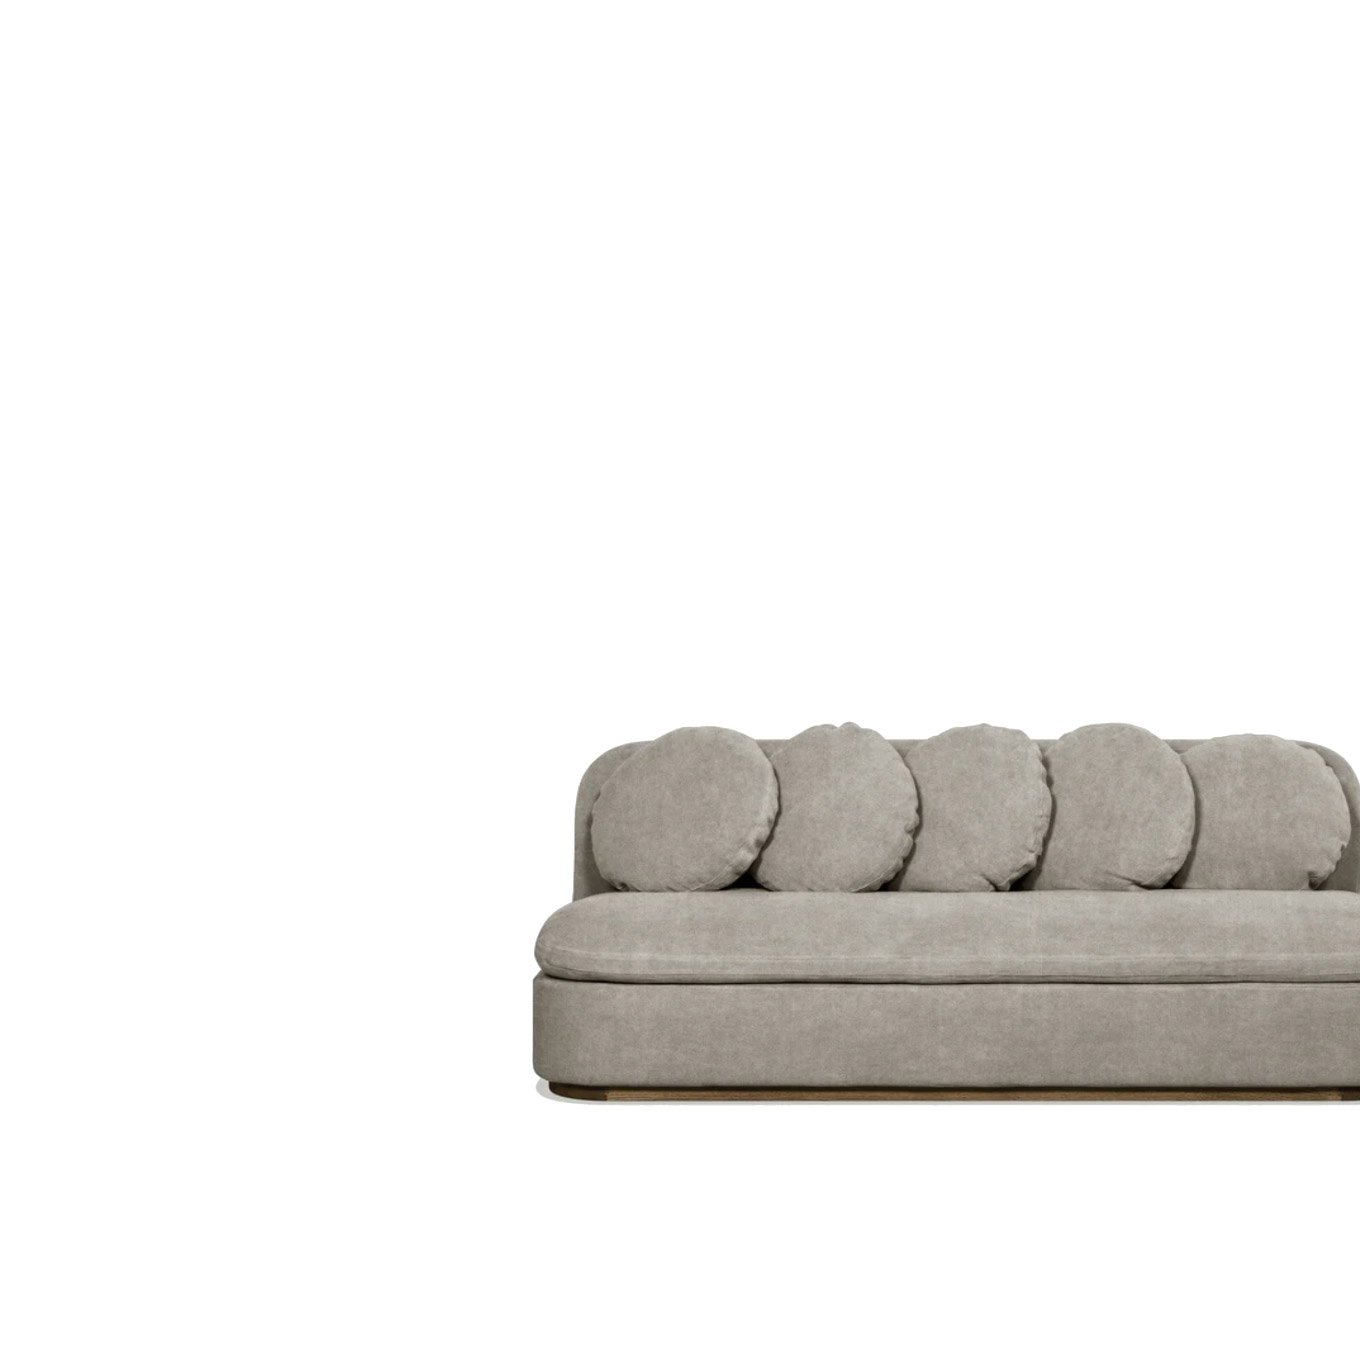 Olea Sofa featured in Architectural Digest